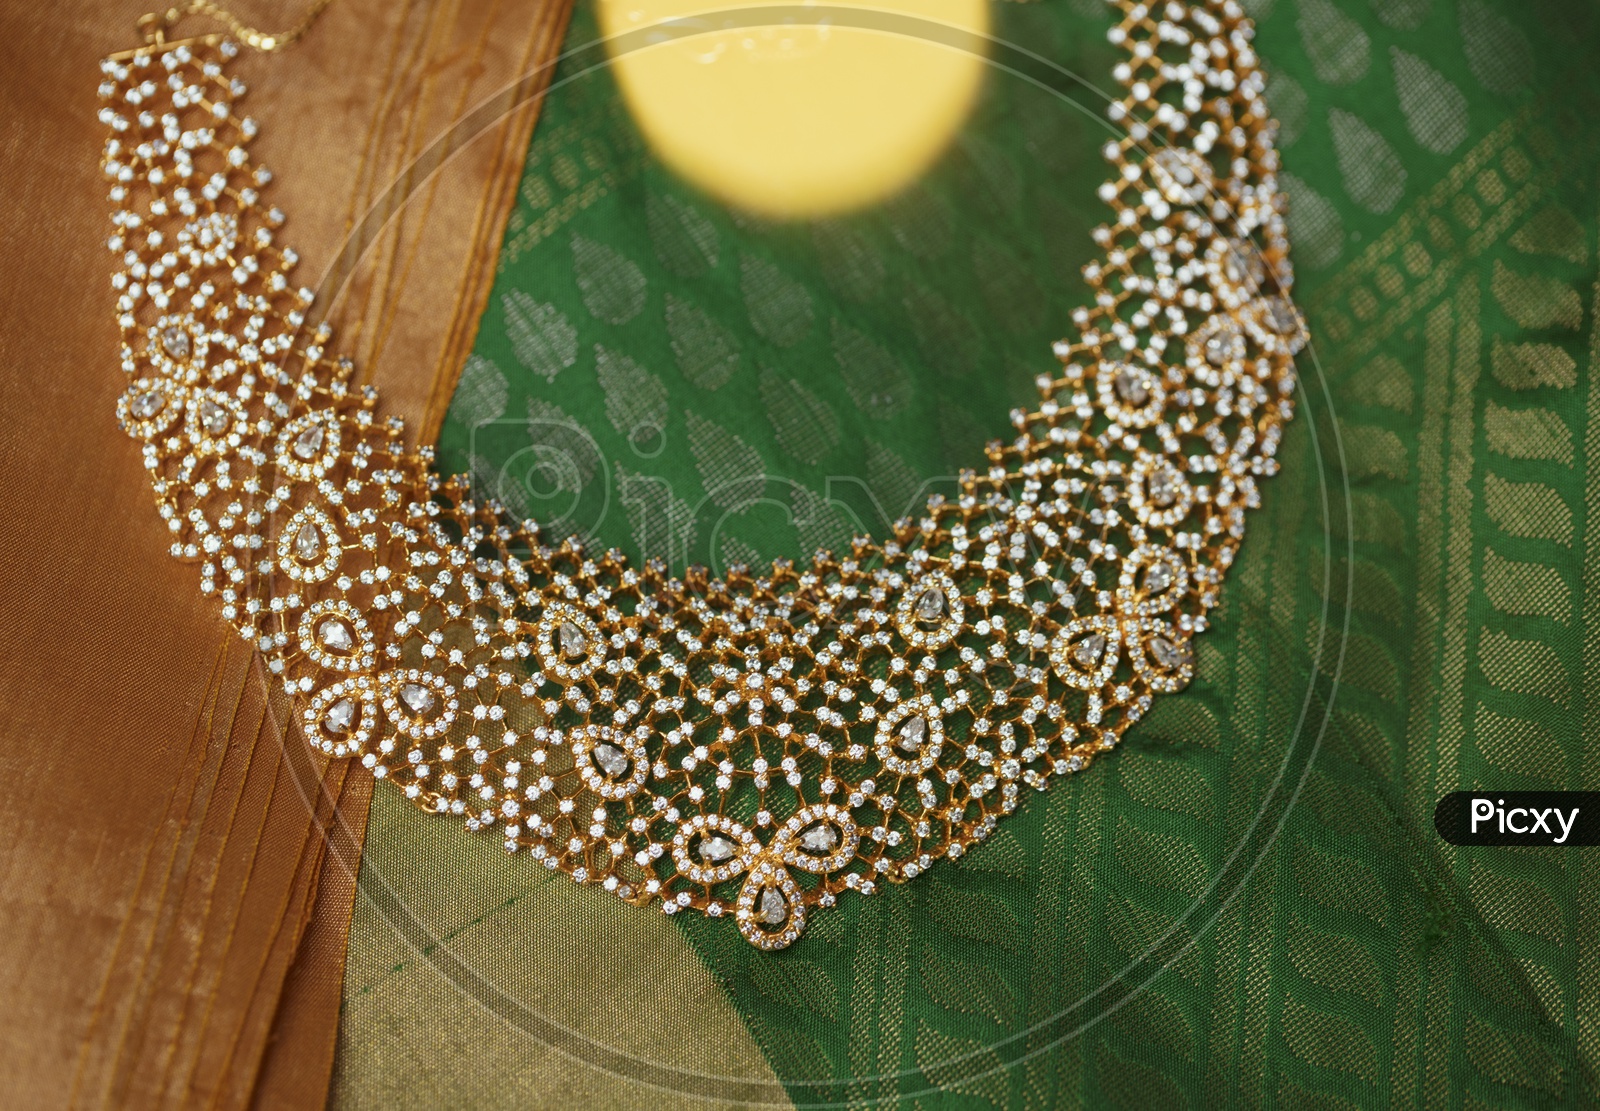 Choker Necklace In Green background - Indian Jewelry/Gold Ornament